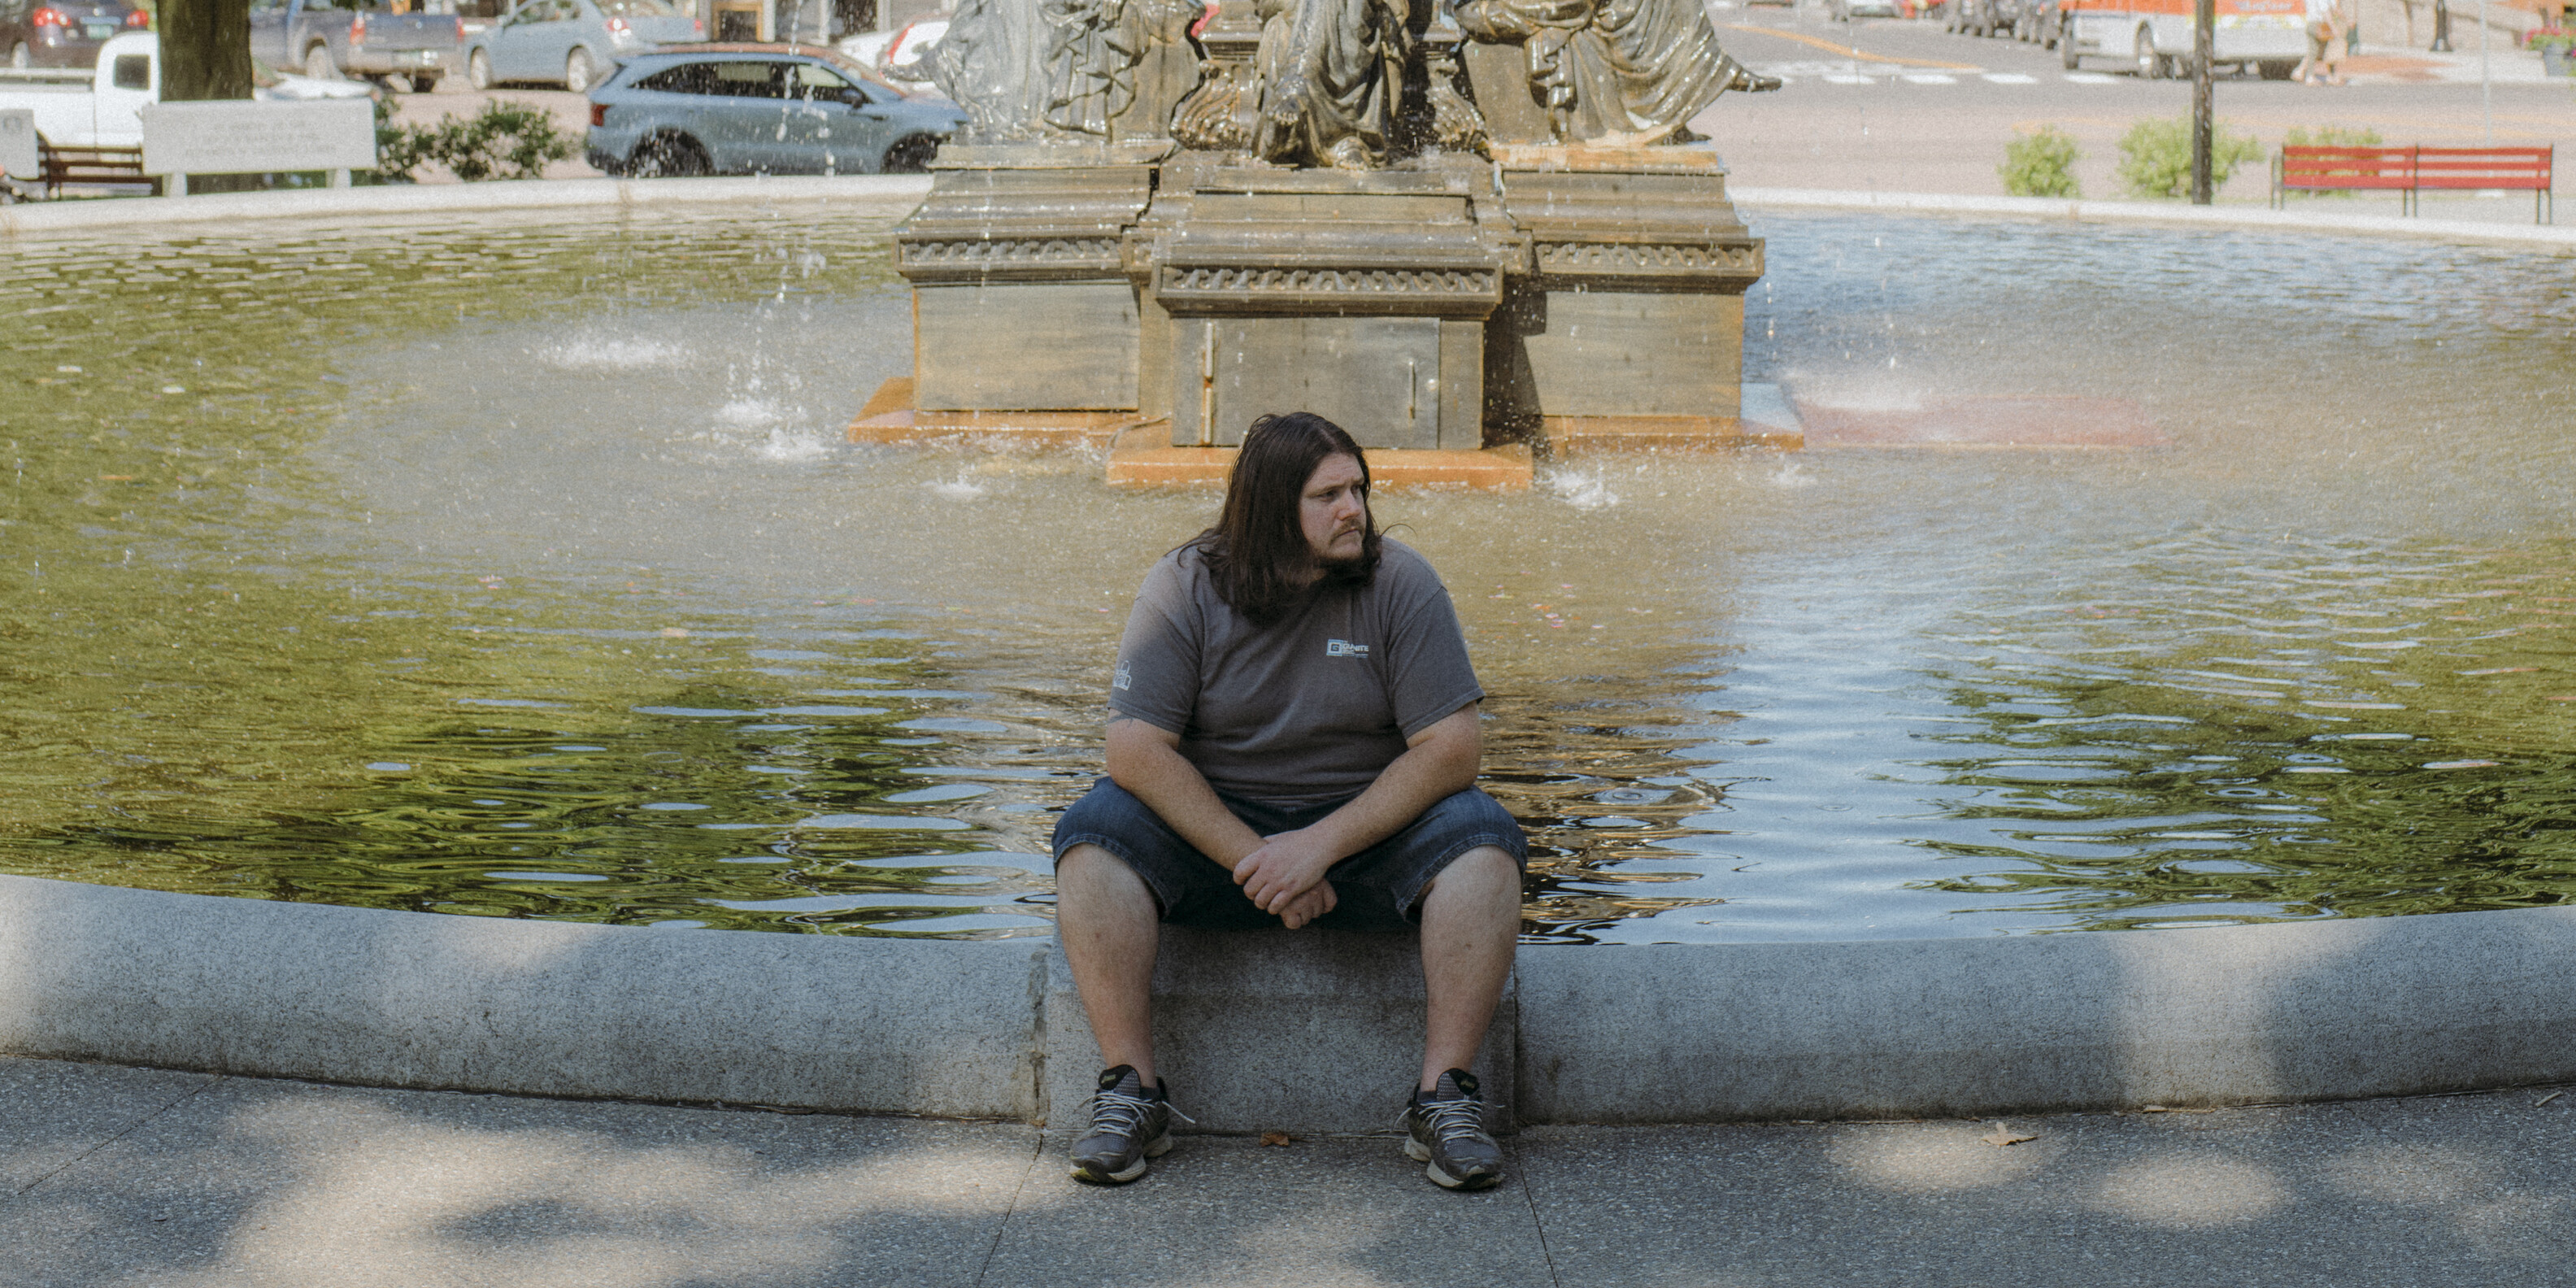 Sean portrait, seated at St. Albans fountain.